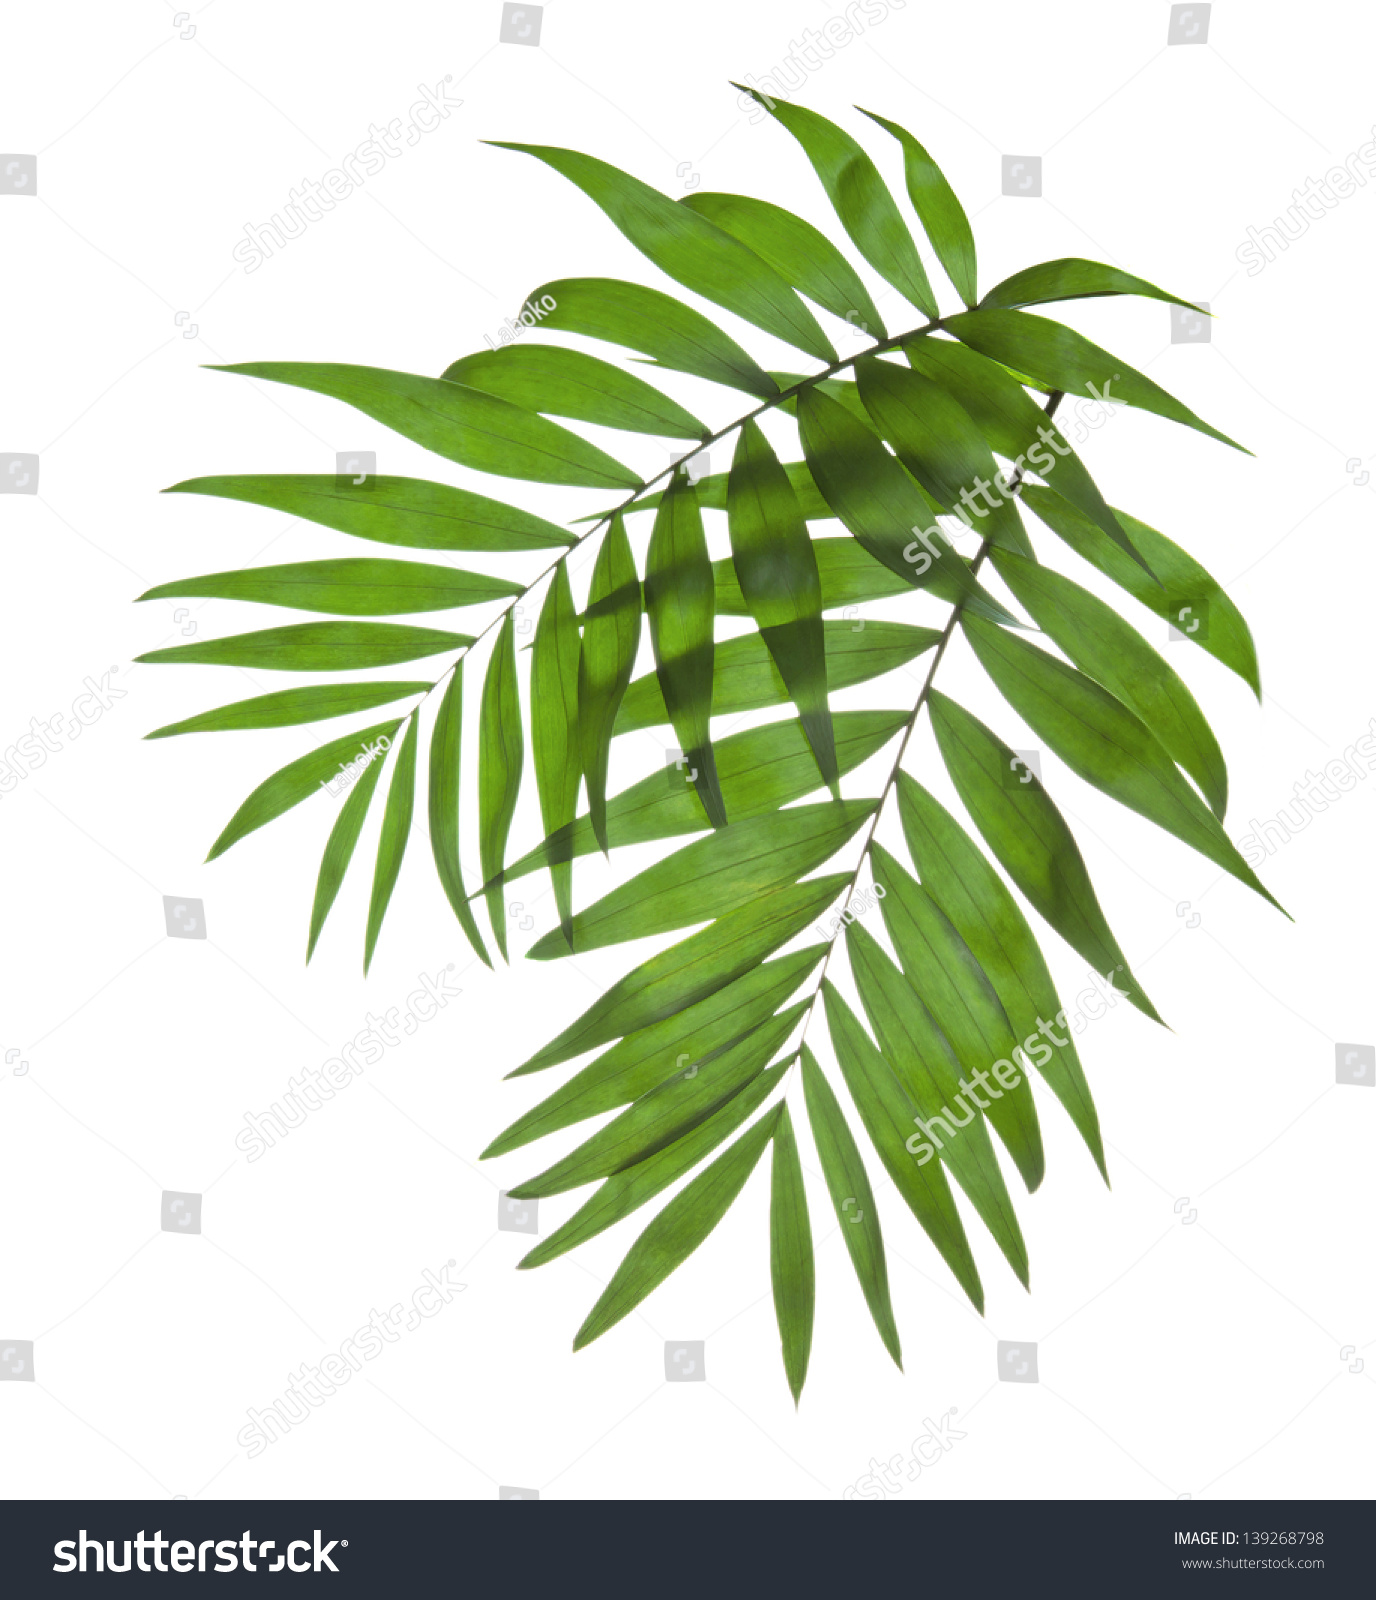 Two leaves of a palm tree isolated on white #139268798